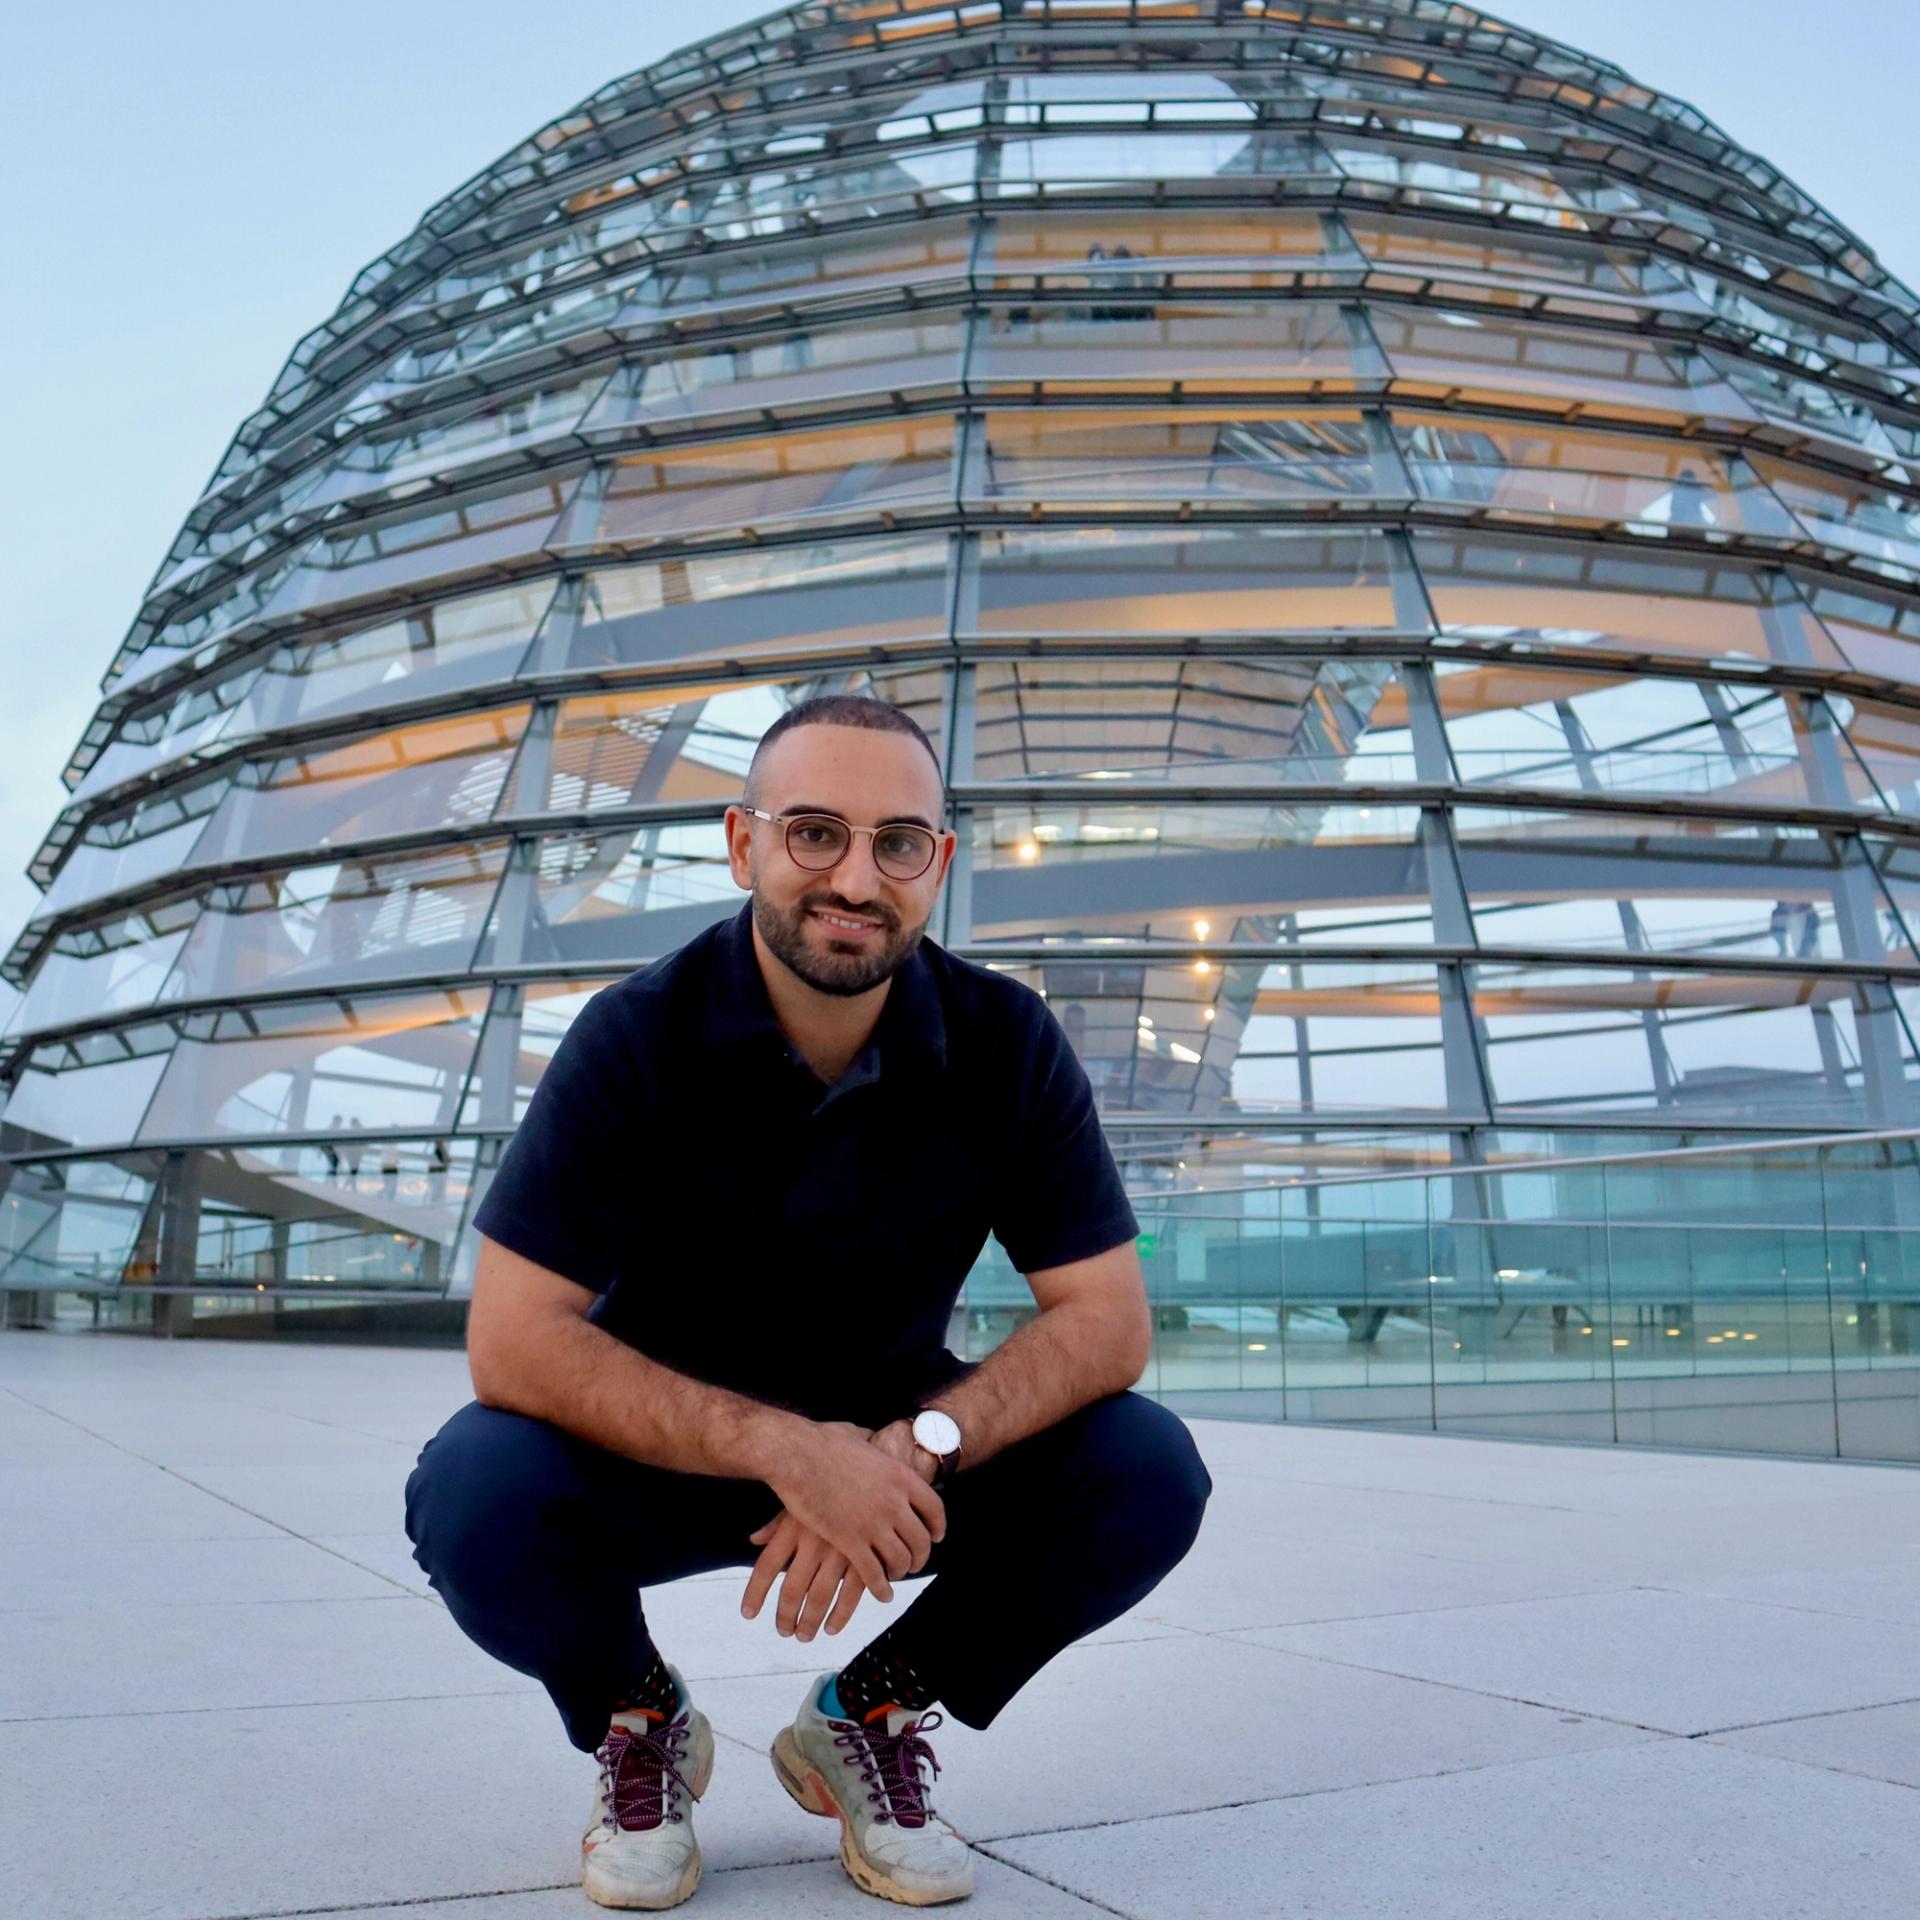 Kassem Taher Saleh in front of the Reichstag dome